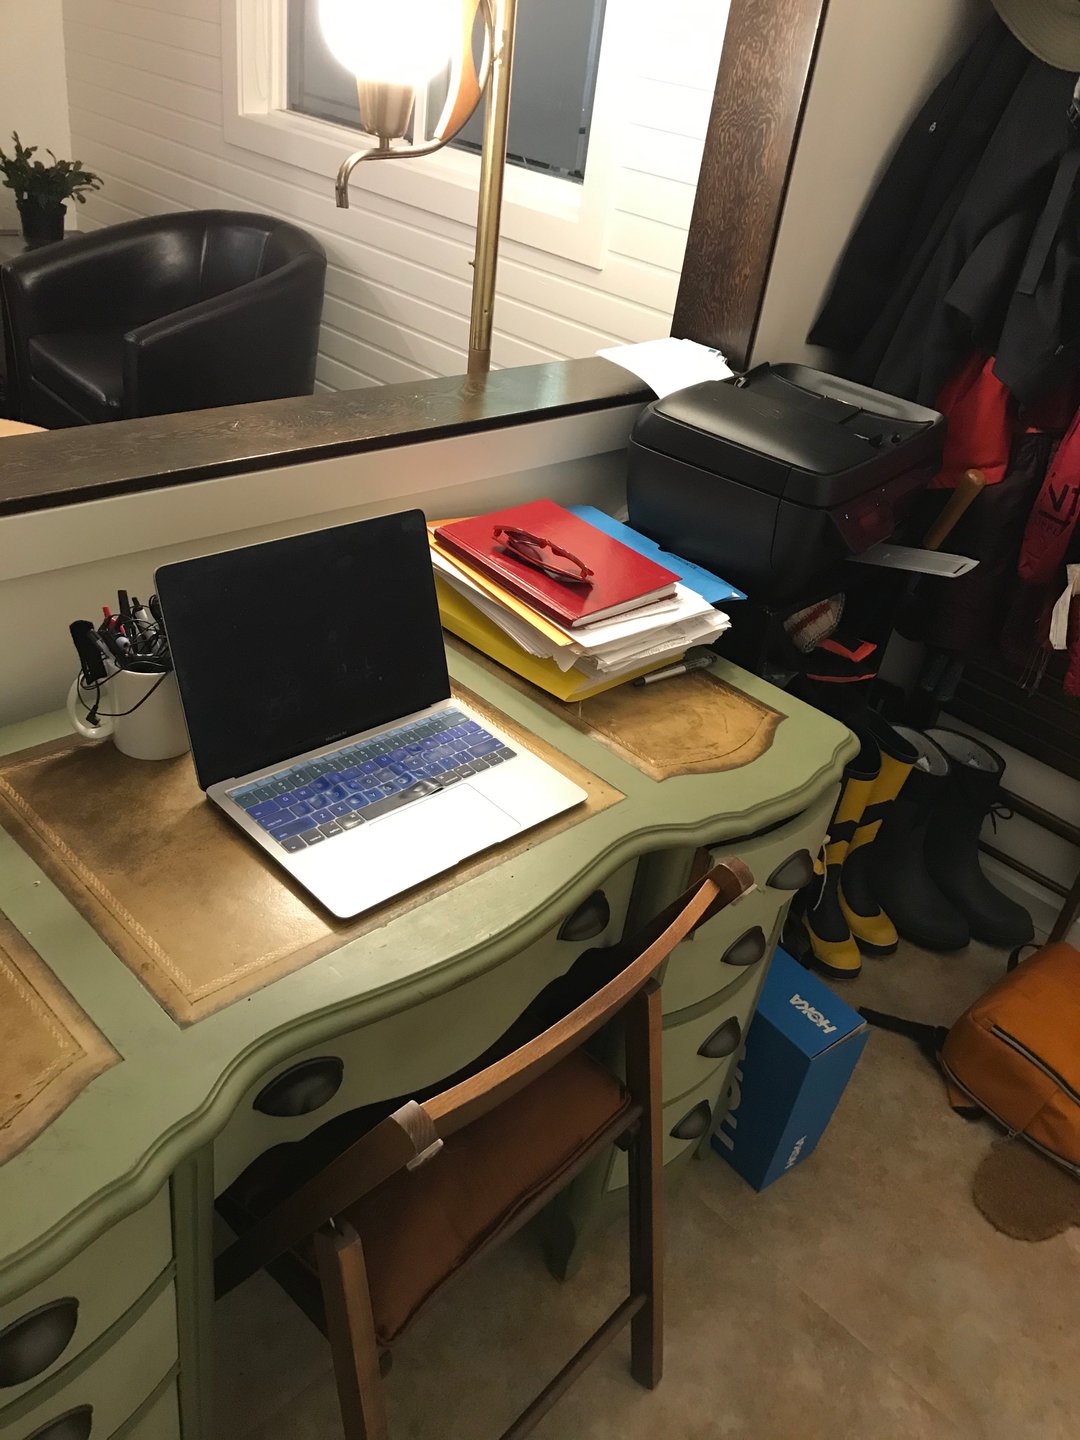 This photograph shows a green desk with a laptop on top of it. To the left, we see a printer with rainboots piled underneath it. A mirror behind the desk reflects a comfy chair and a lamp further back in the room.